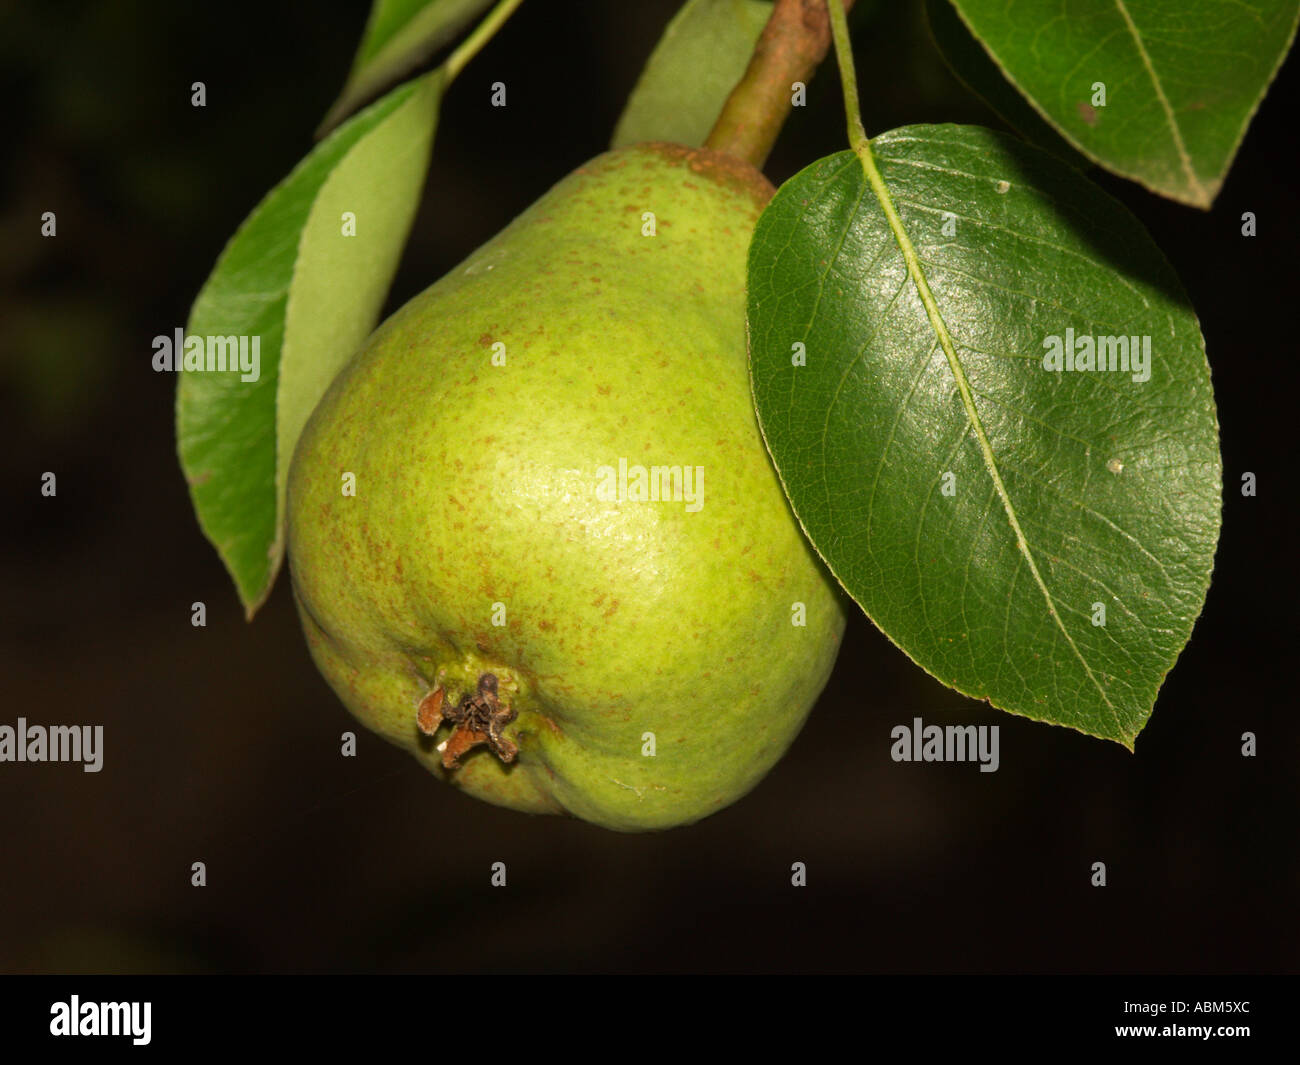 Pear and leaves growing on a tree shown against a plain black background Stock Photo